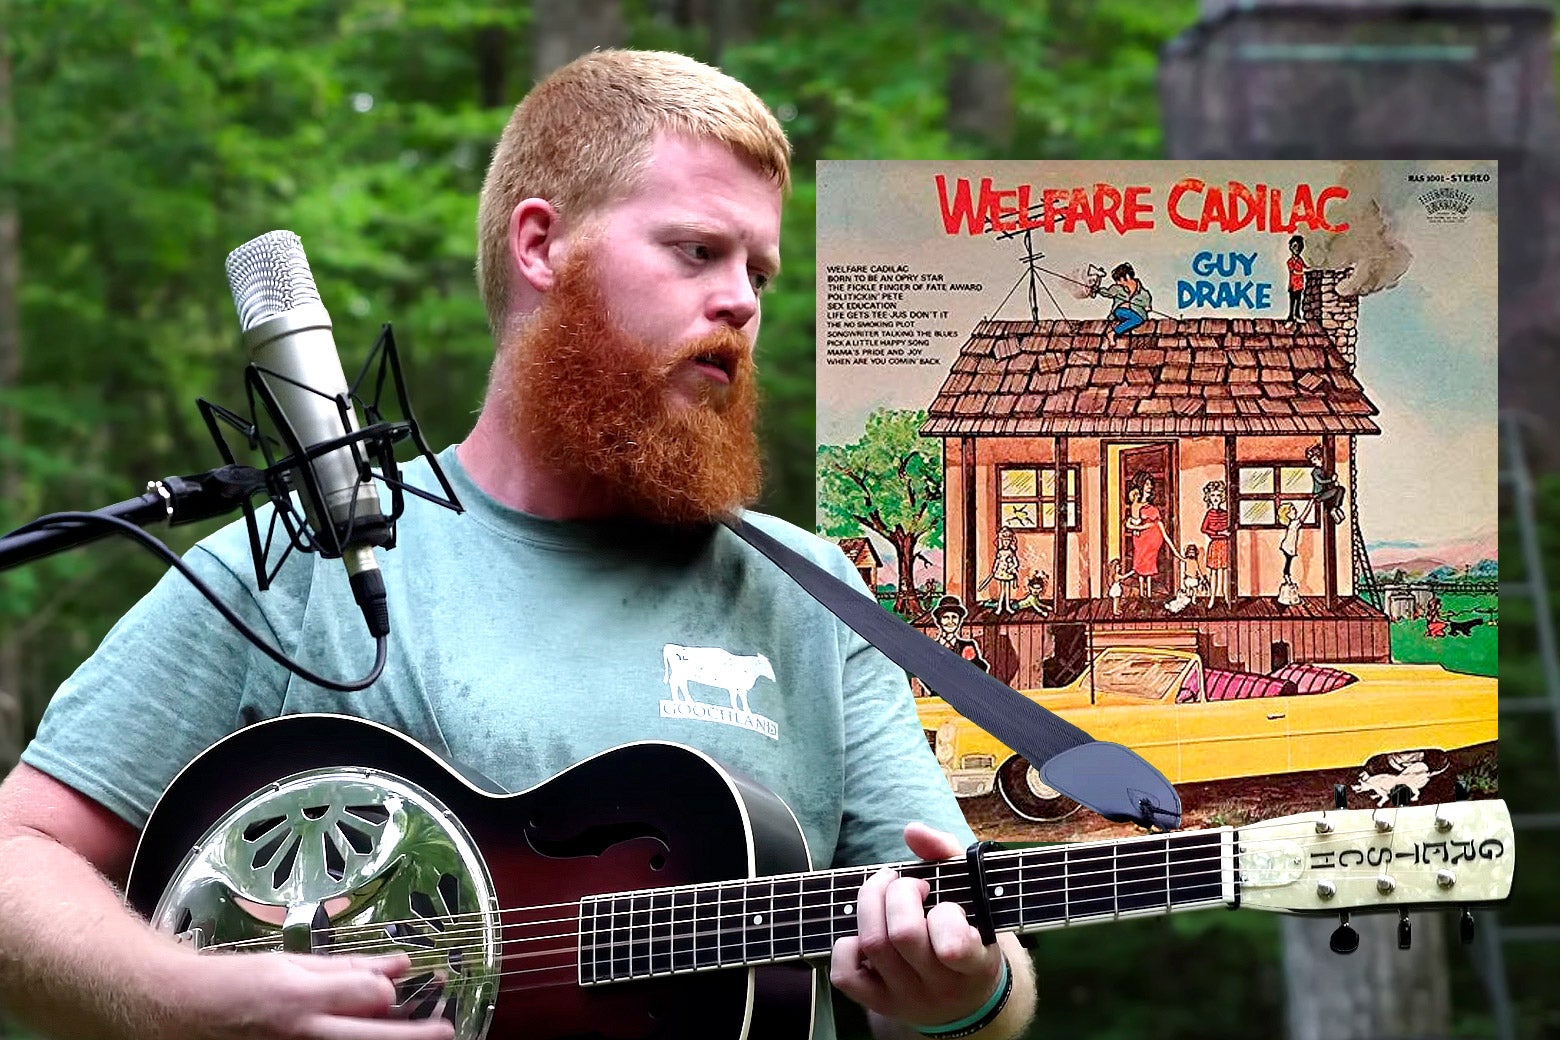 A photoillustration shows bearded, redhaired singer Oliver Anthony playing a resonator guitar while looking to his left. To his left, the old album cover for Guy Drake’s “Welfare Cadillac” shows a cartoonish drawing of a poor white family in a broken down shack with a bright yellow Cadillac parked out front.